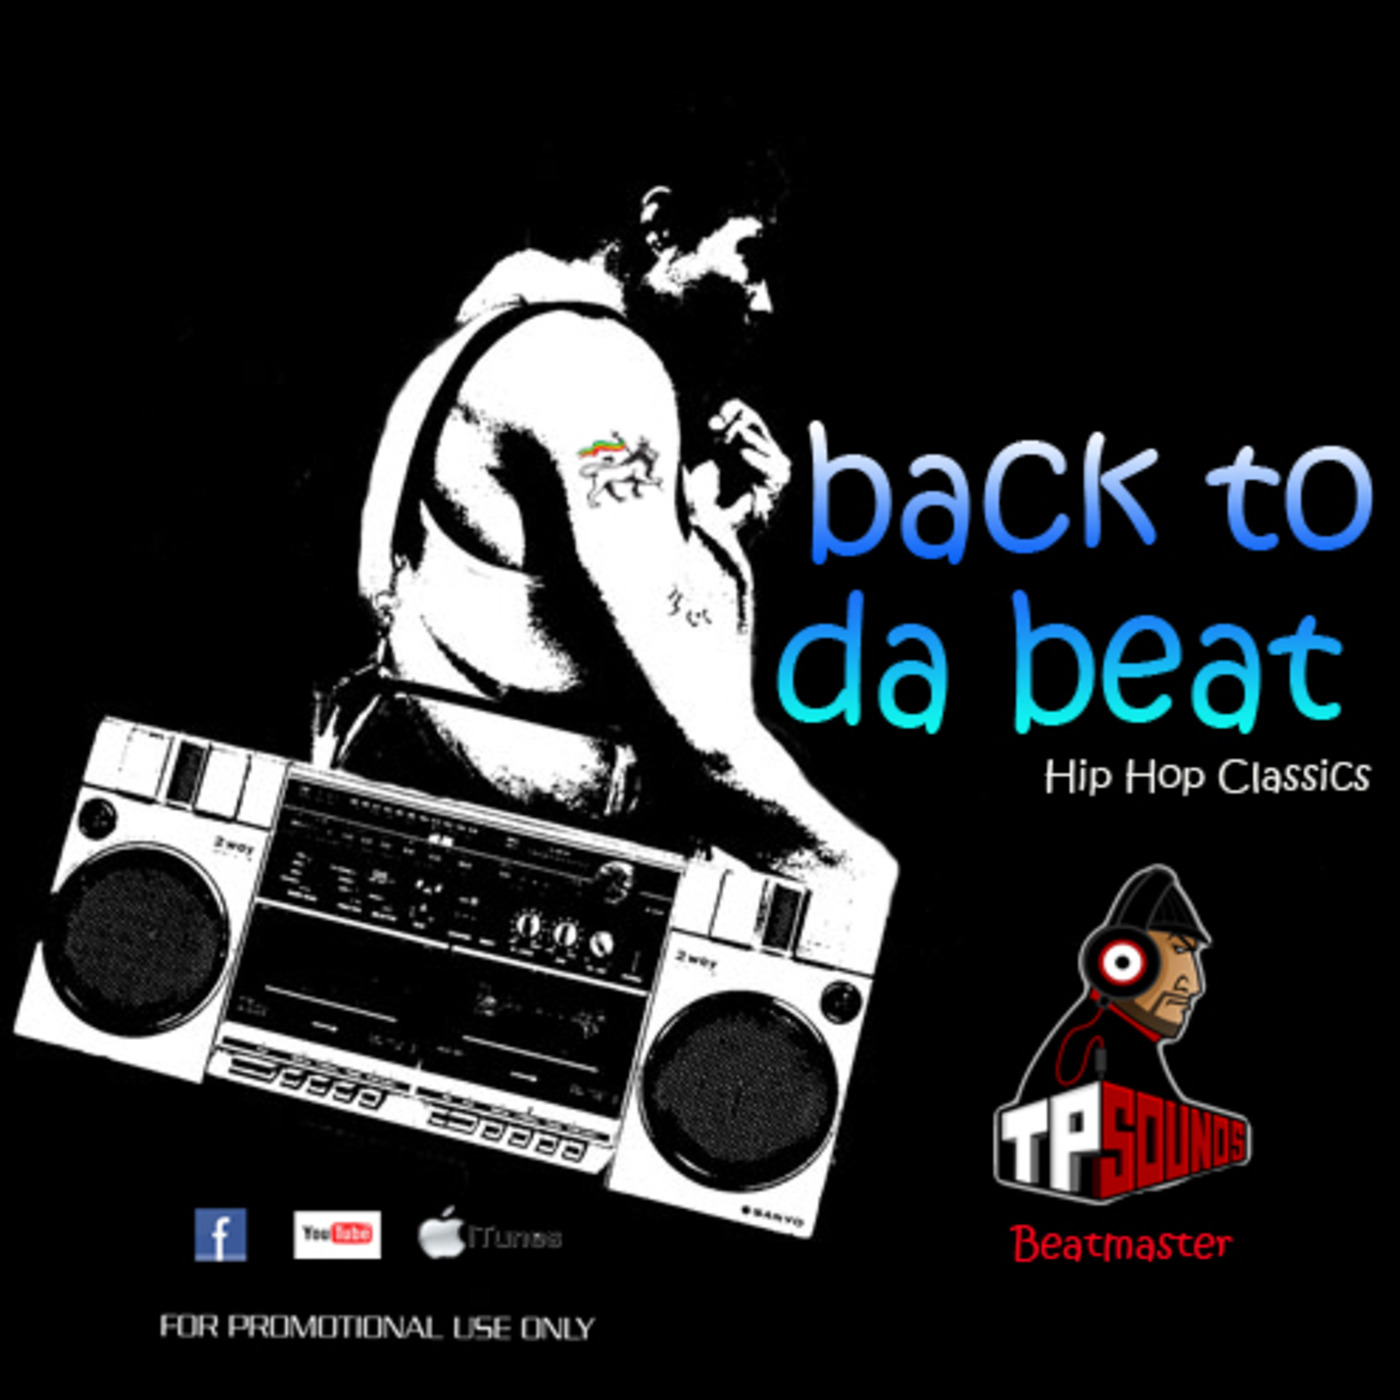 Episode 10: Back to the Beat - Volume 1 (Hip Hop Classics)